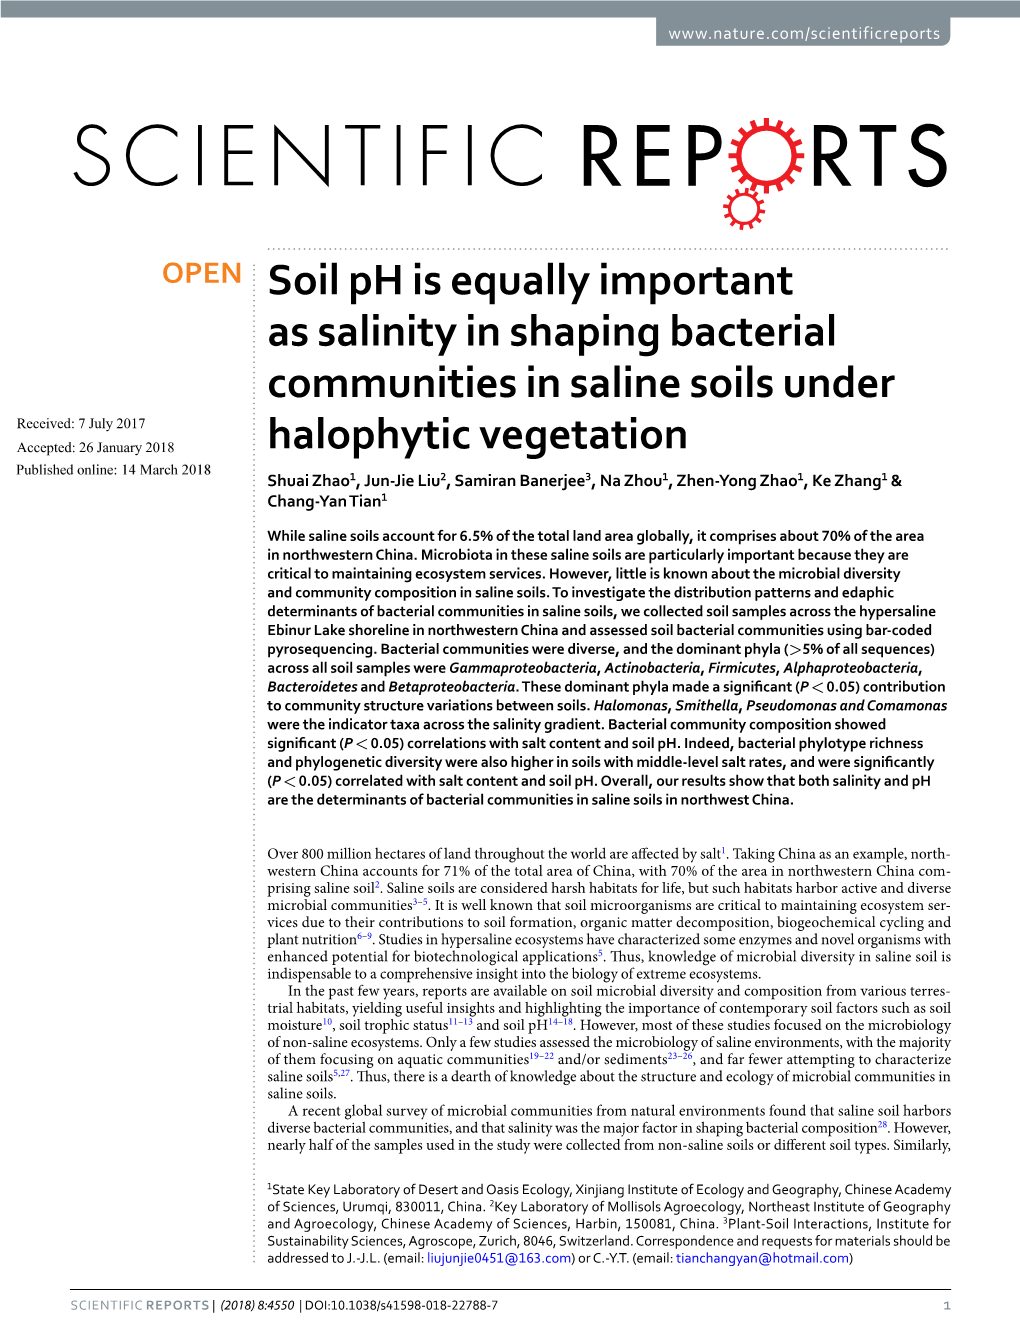 Soil Ph Is Equally Important As Salinity in Shaping Bacterial Communities In